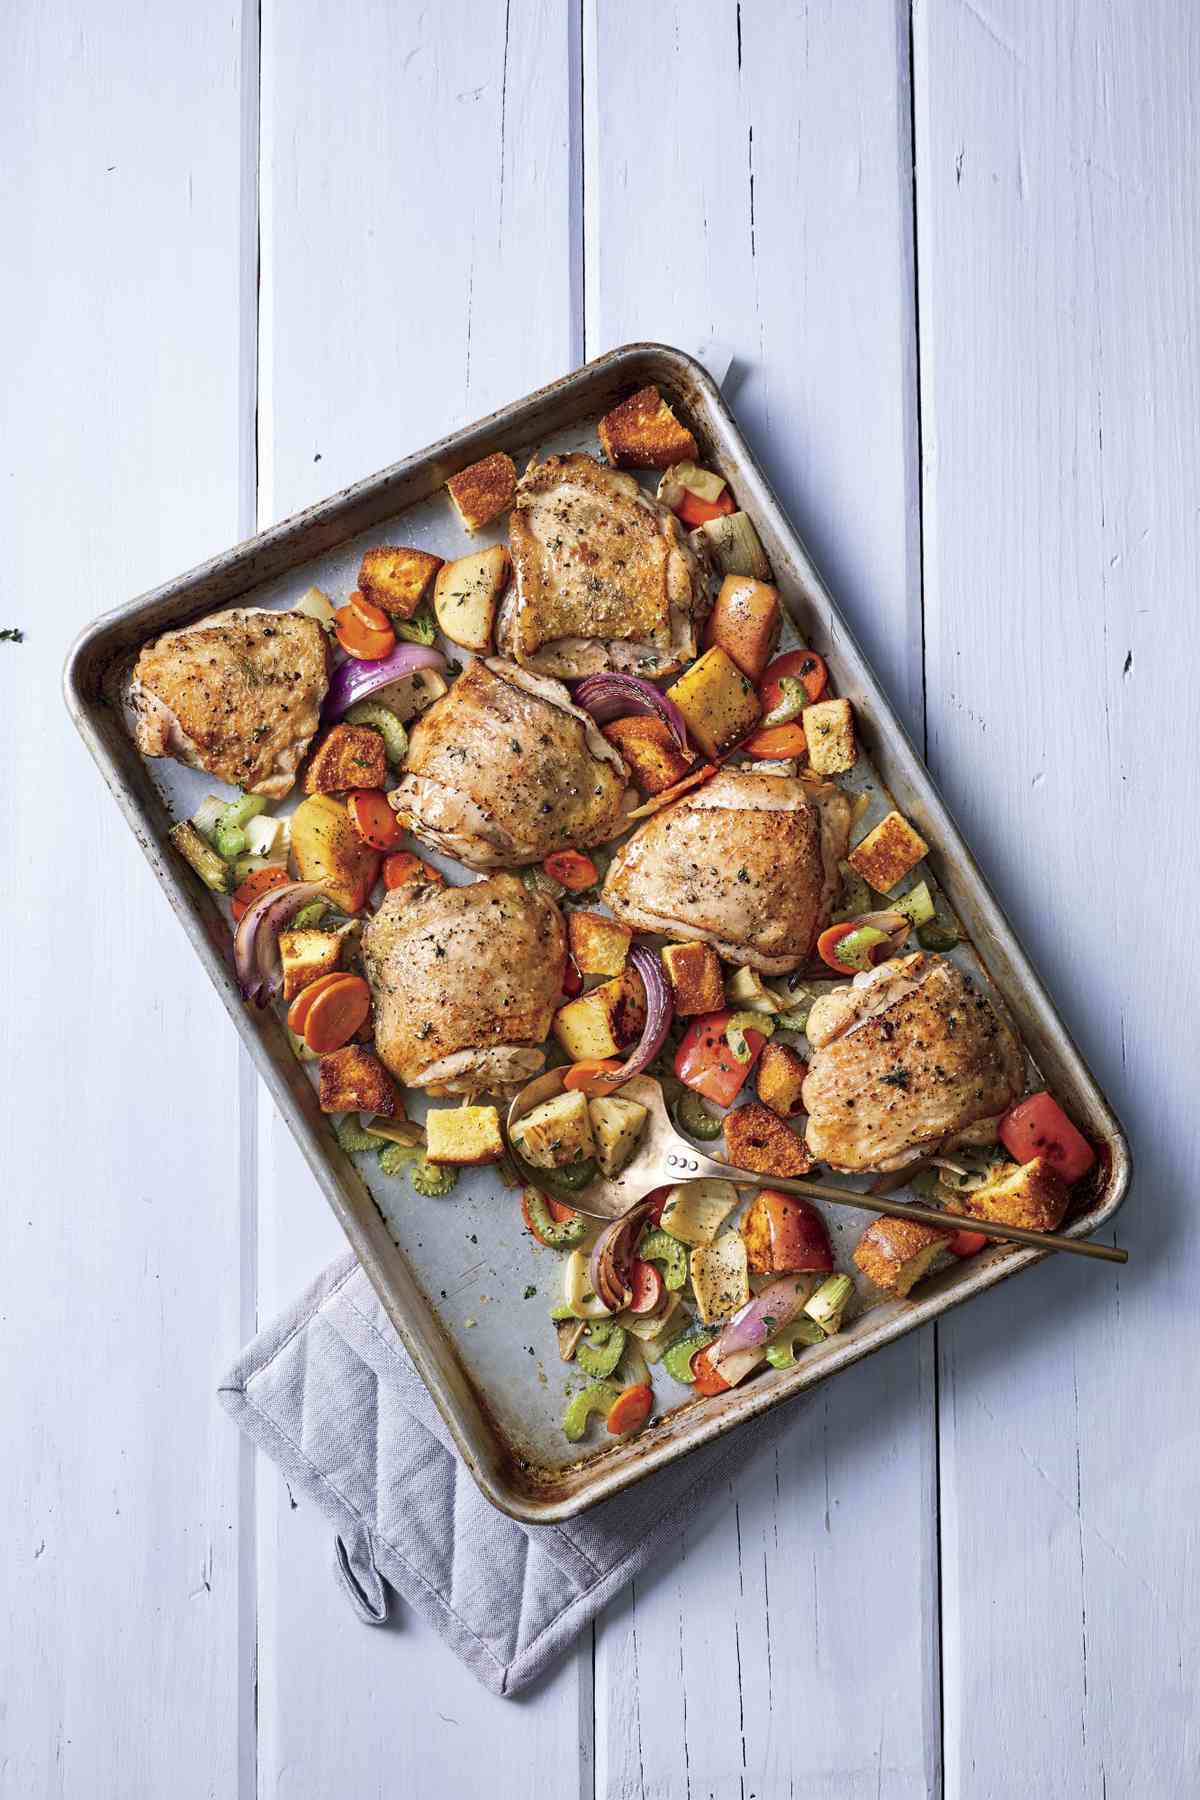 Baked Chicken Thighs Recipe with Dressing